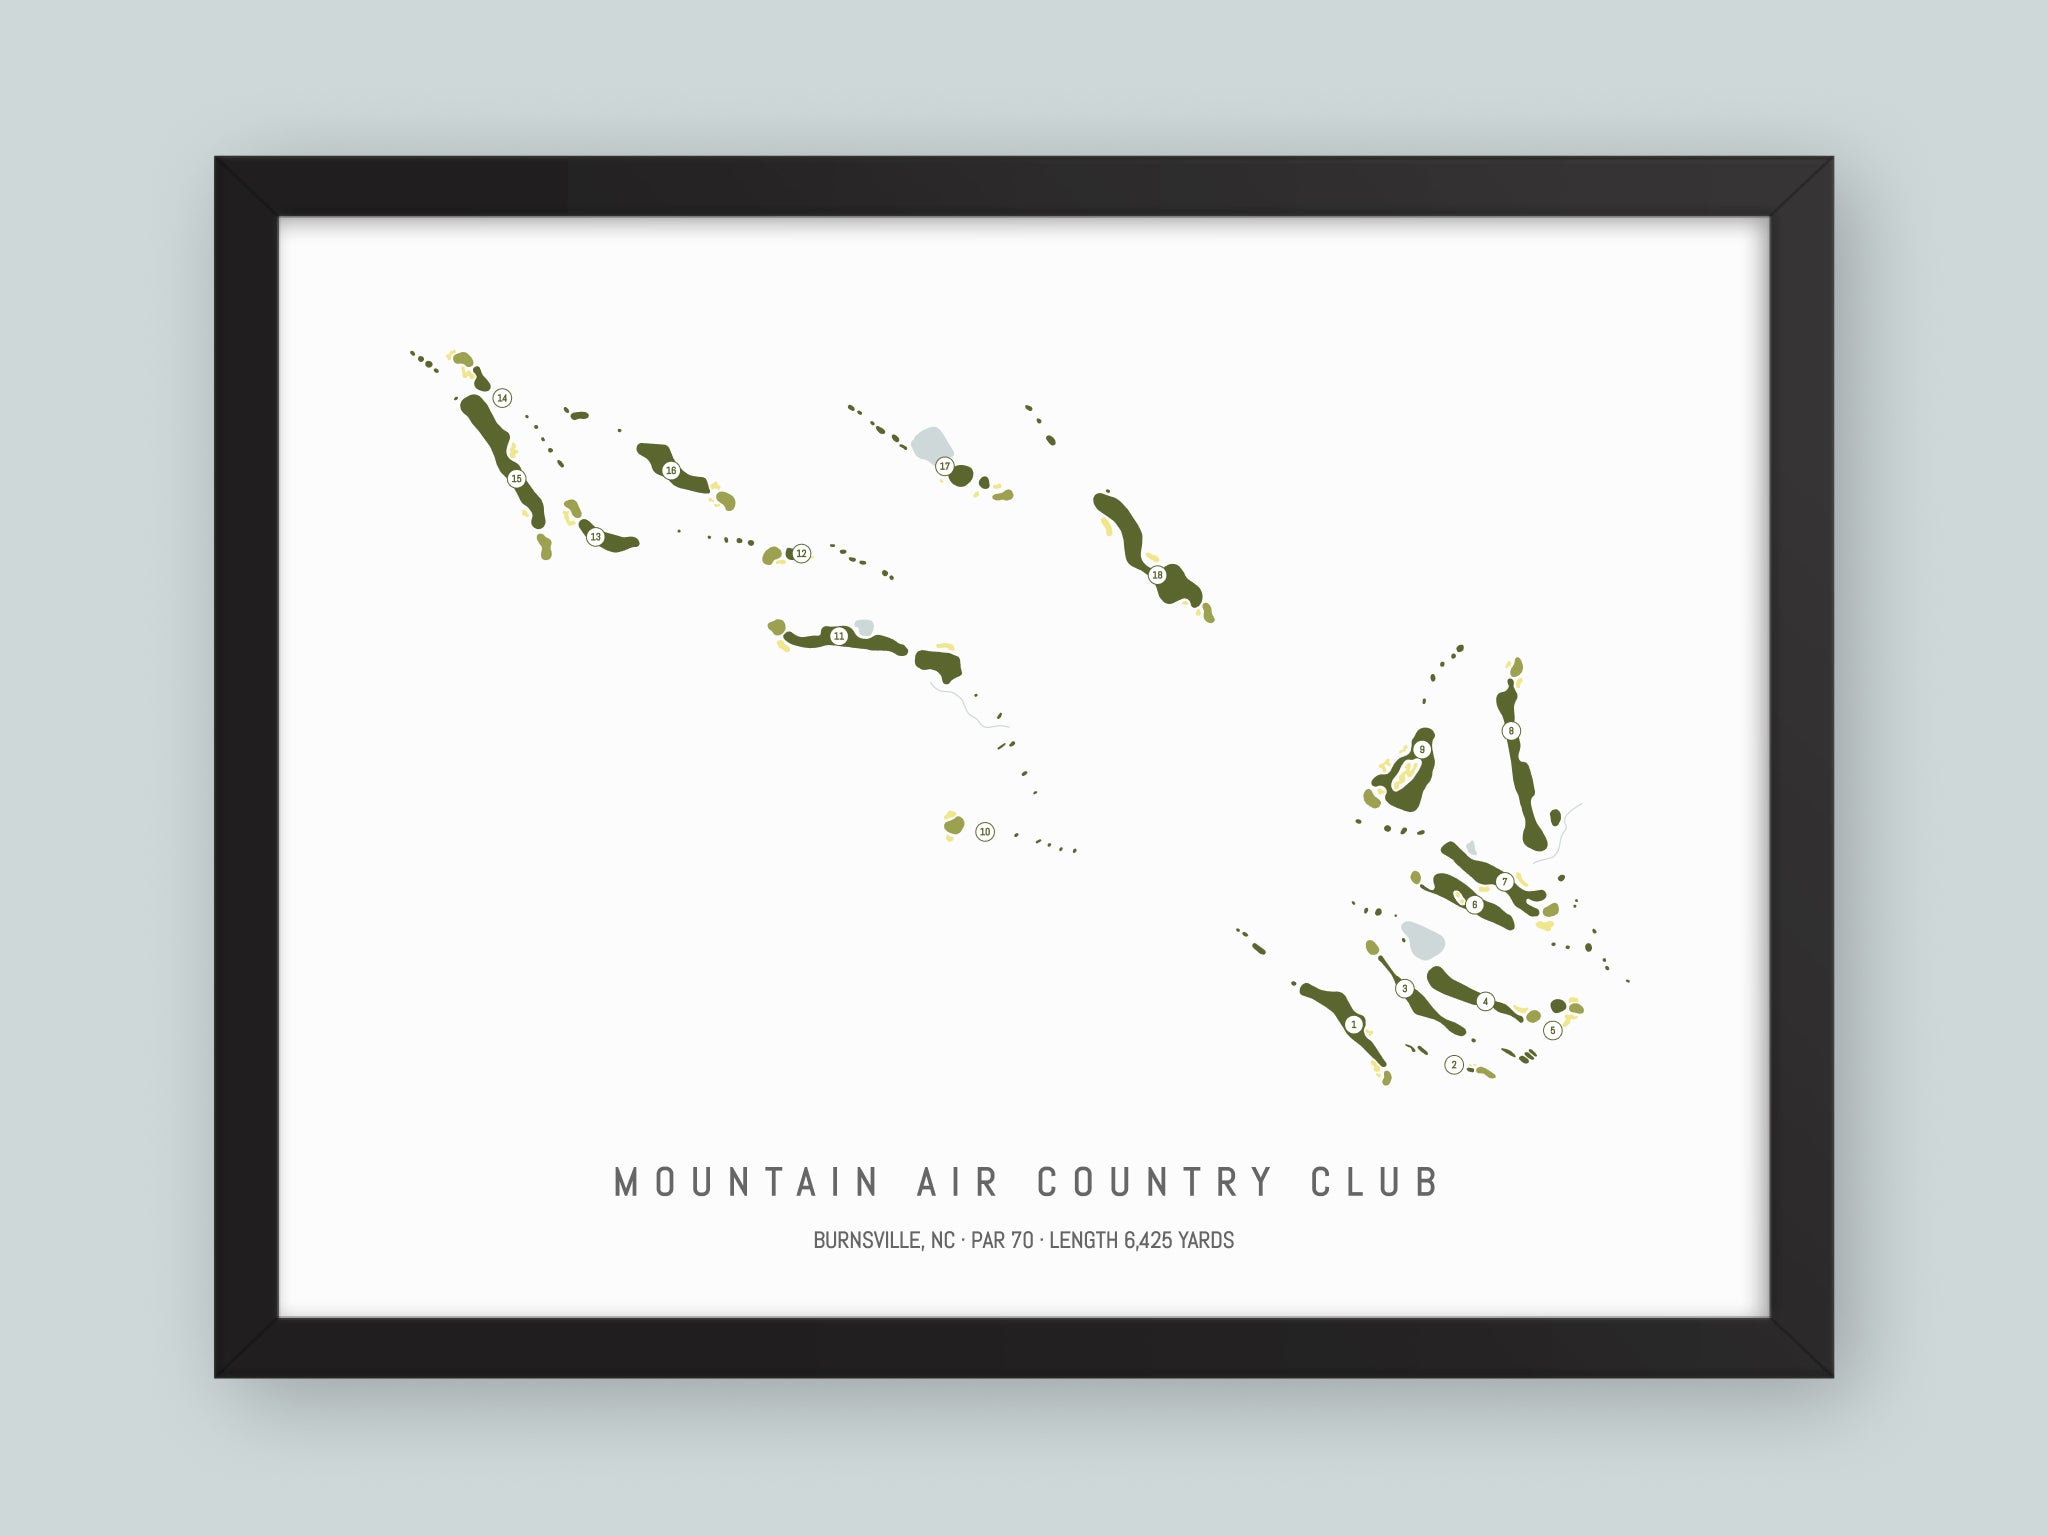 Mountain-Air-Country-Club-NC--Black-Frame-24x18-With-Hole-Numbers